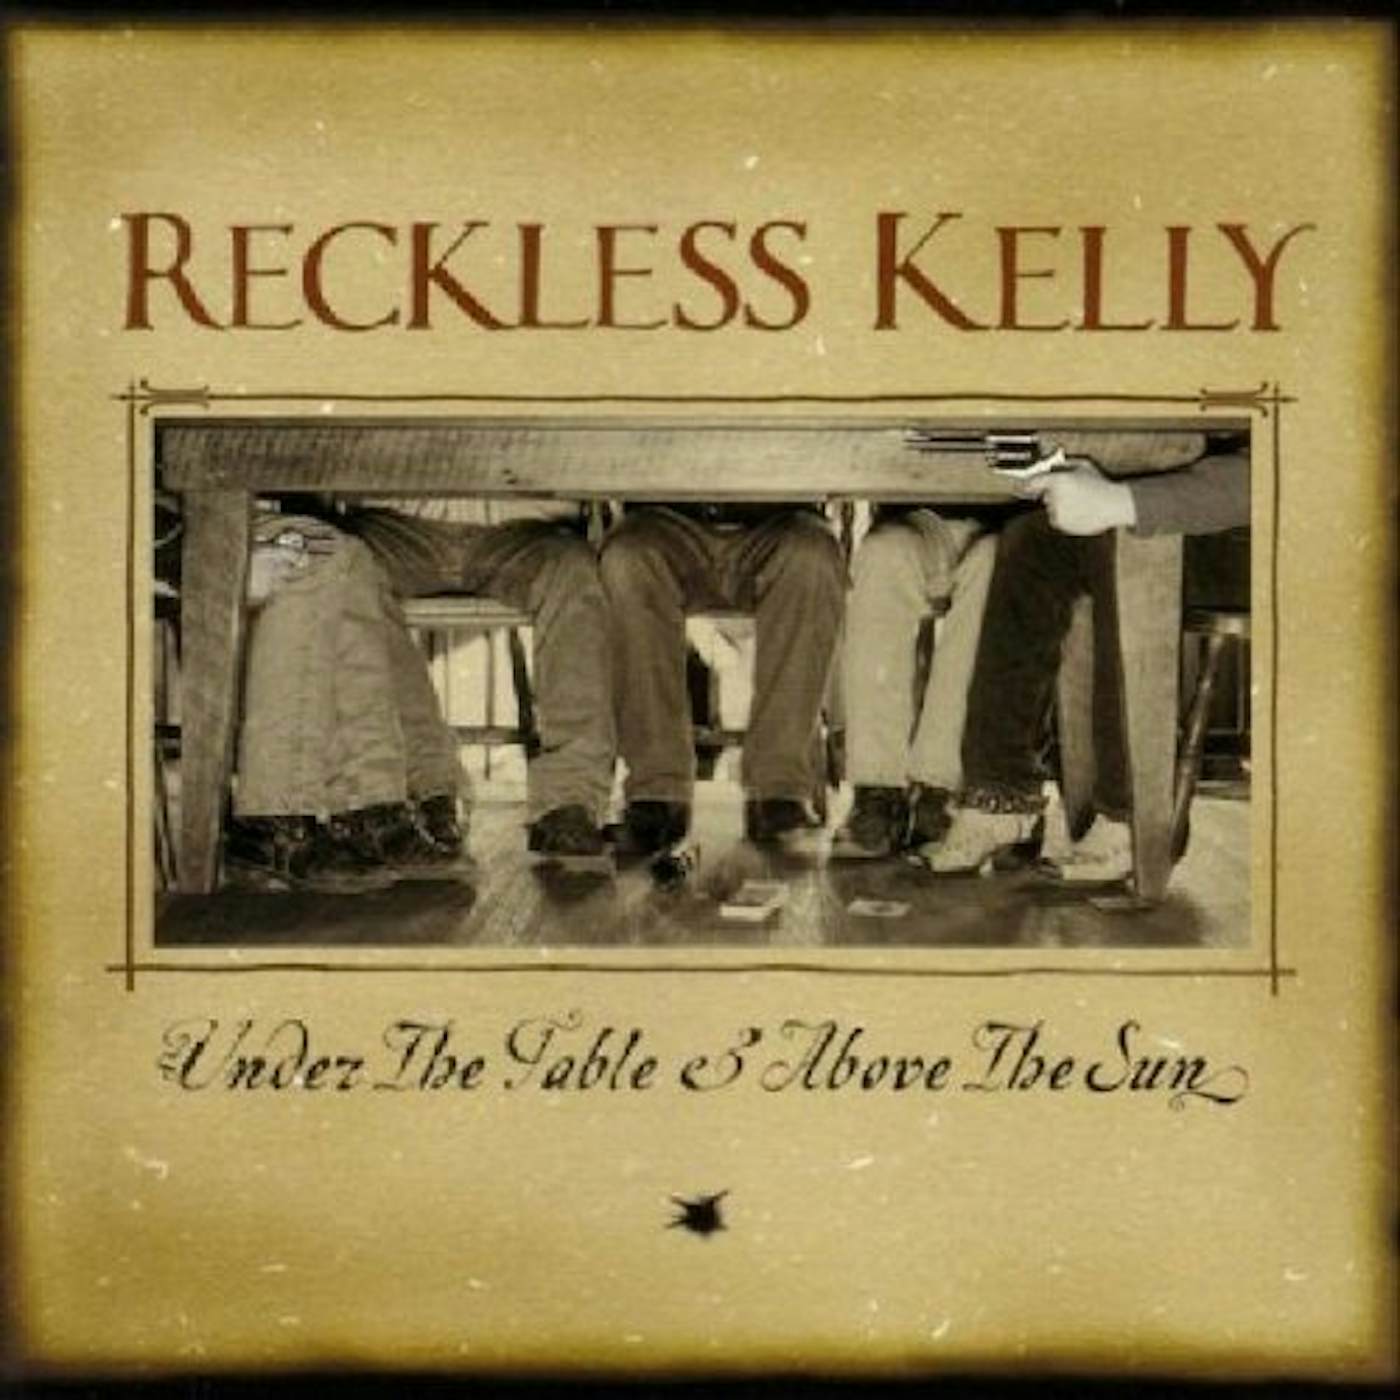 Reckless Kelly UNDER THE TABLE & ABOVE THE SUN CD